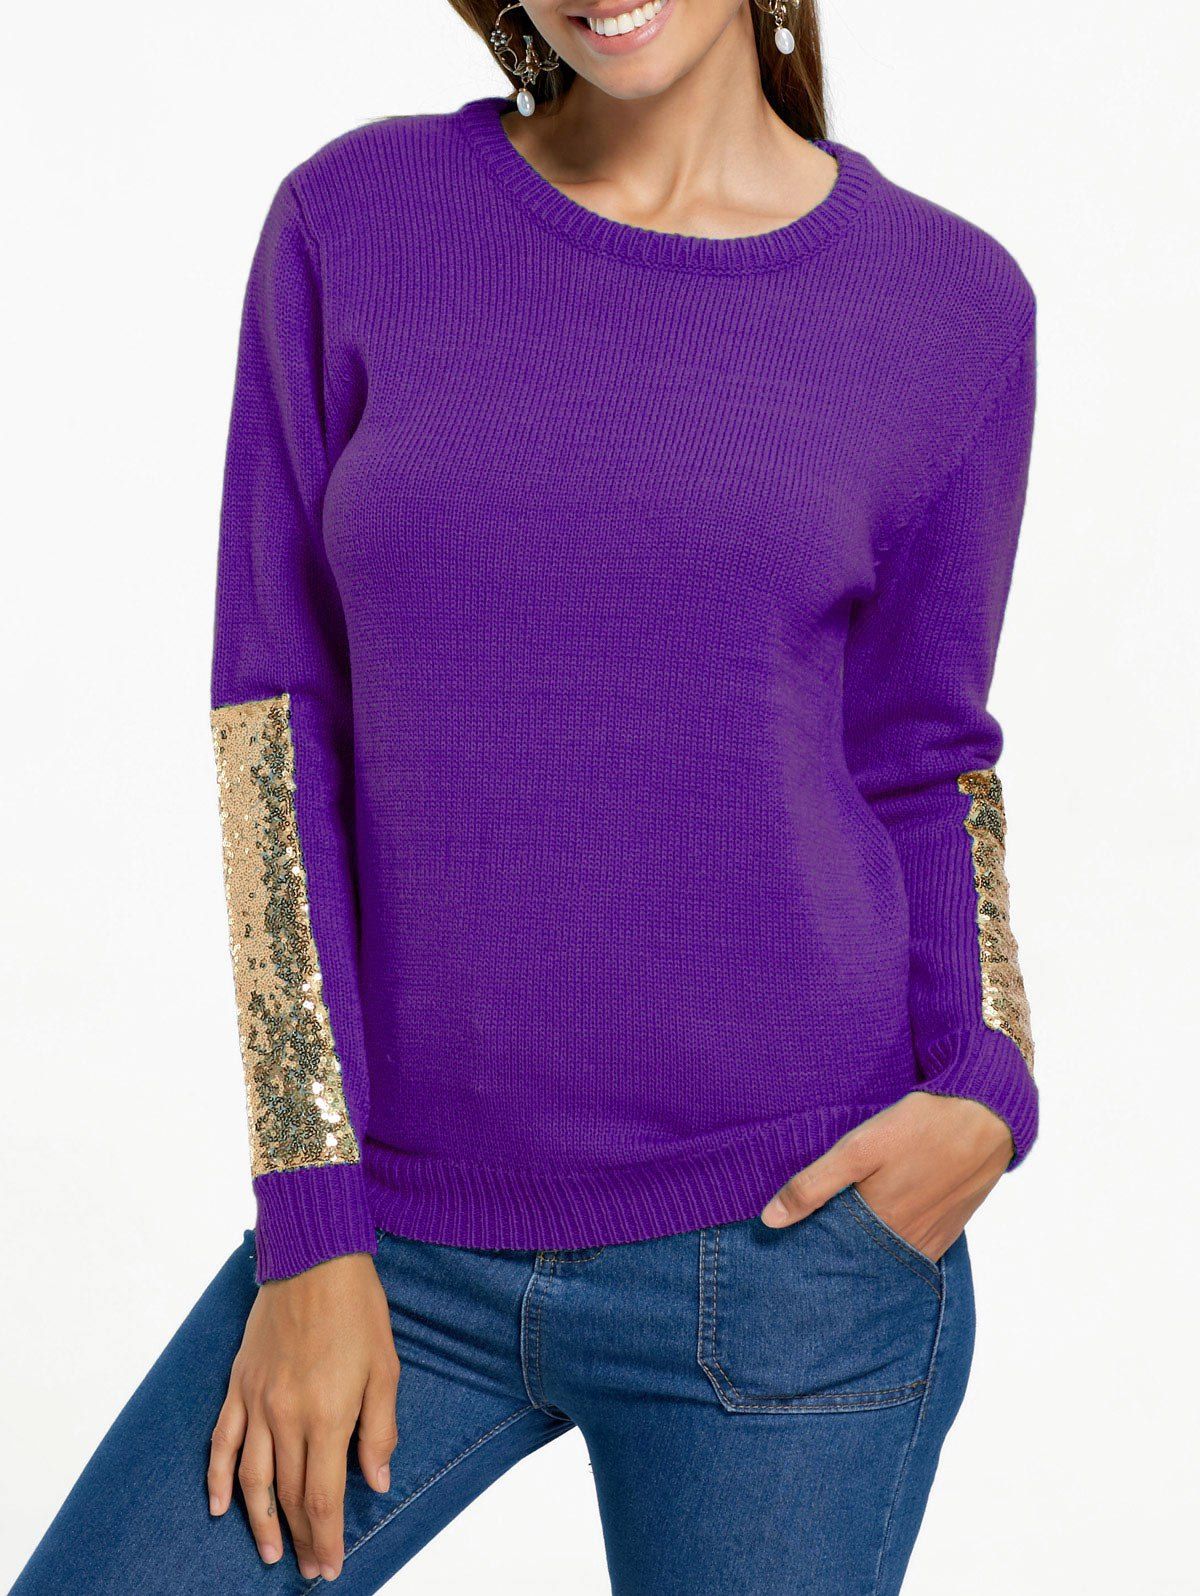 Sequin Panel Pullover Knit Sweater - PURPLE 2XL